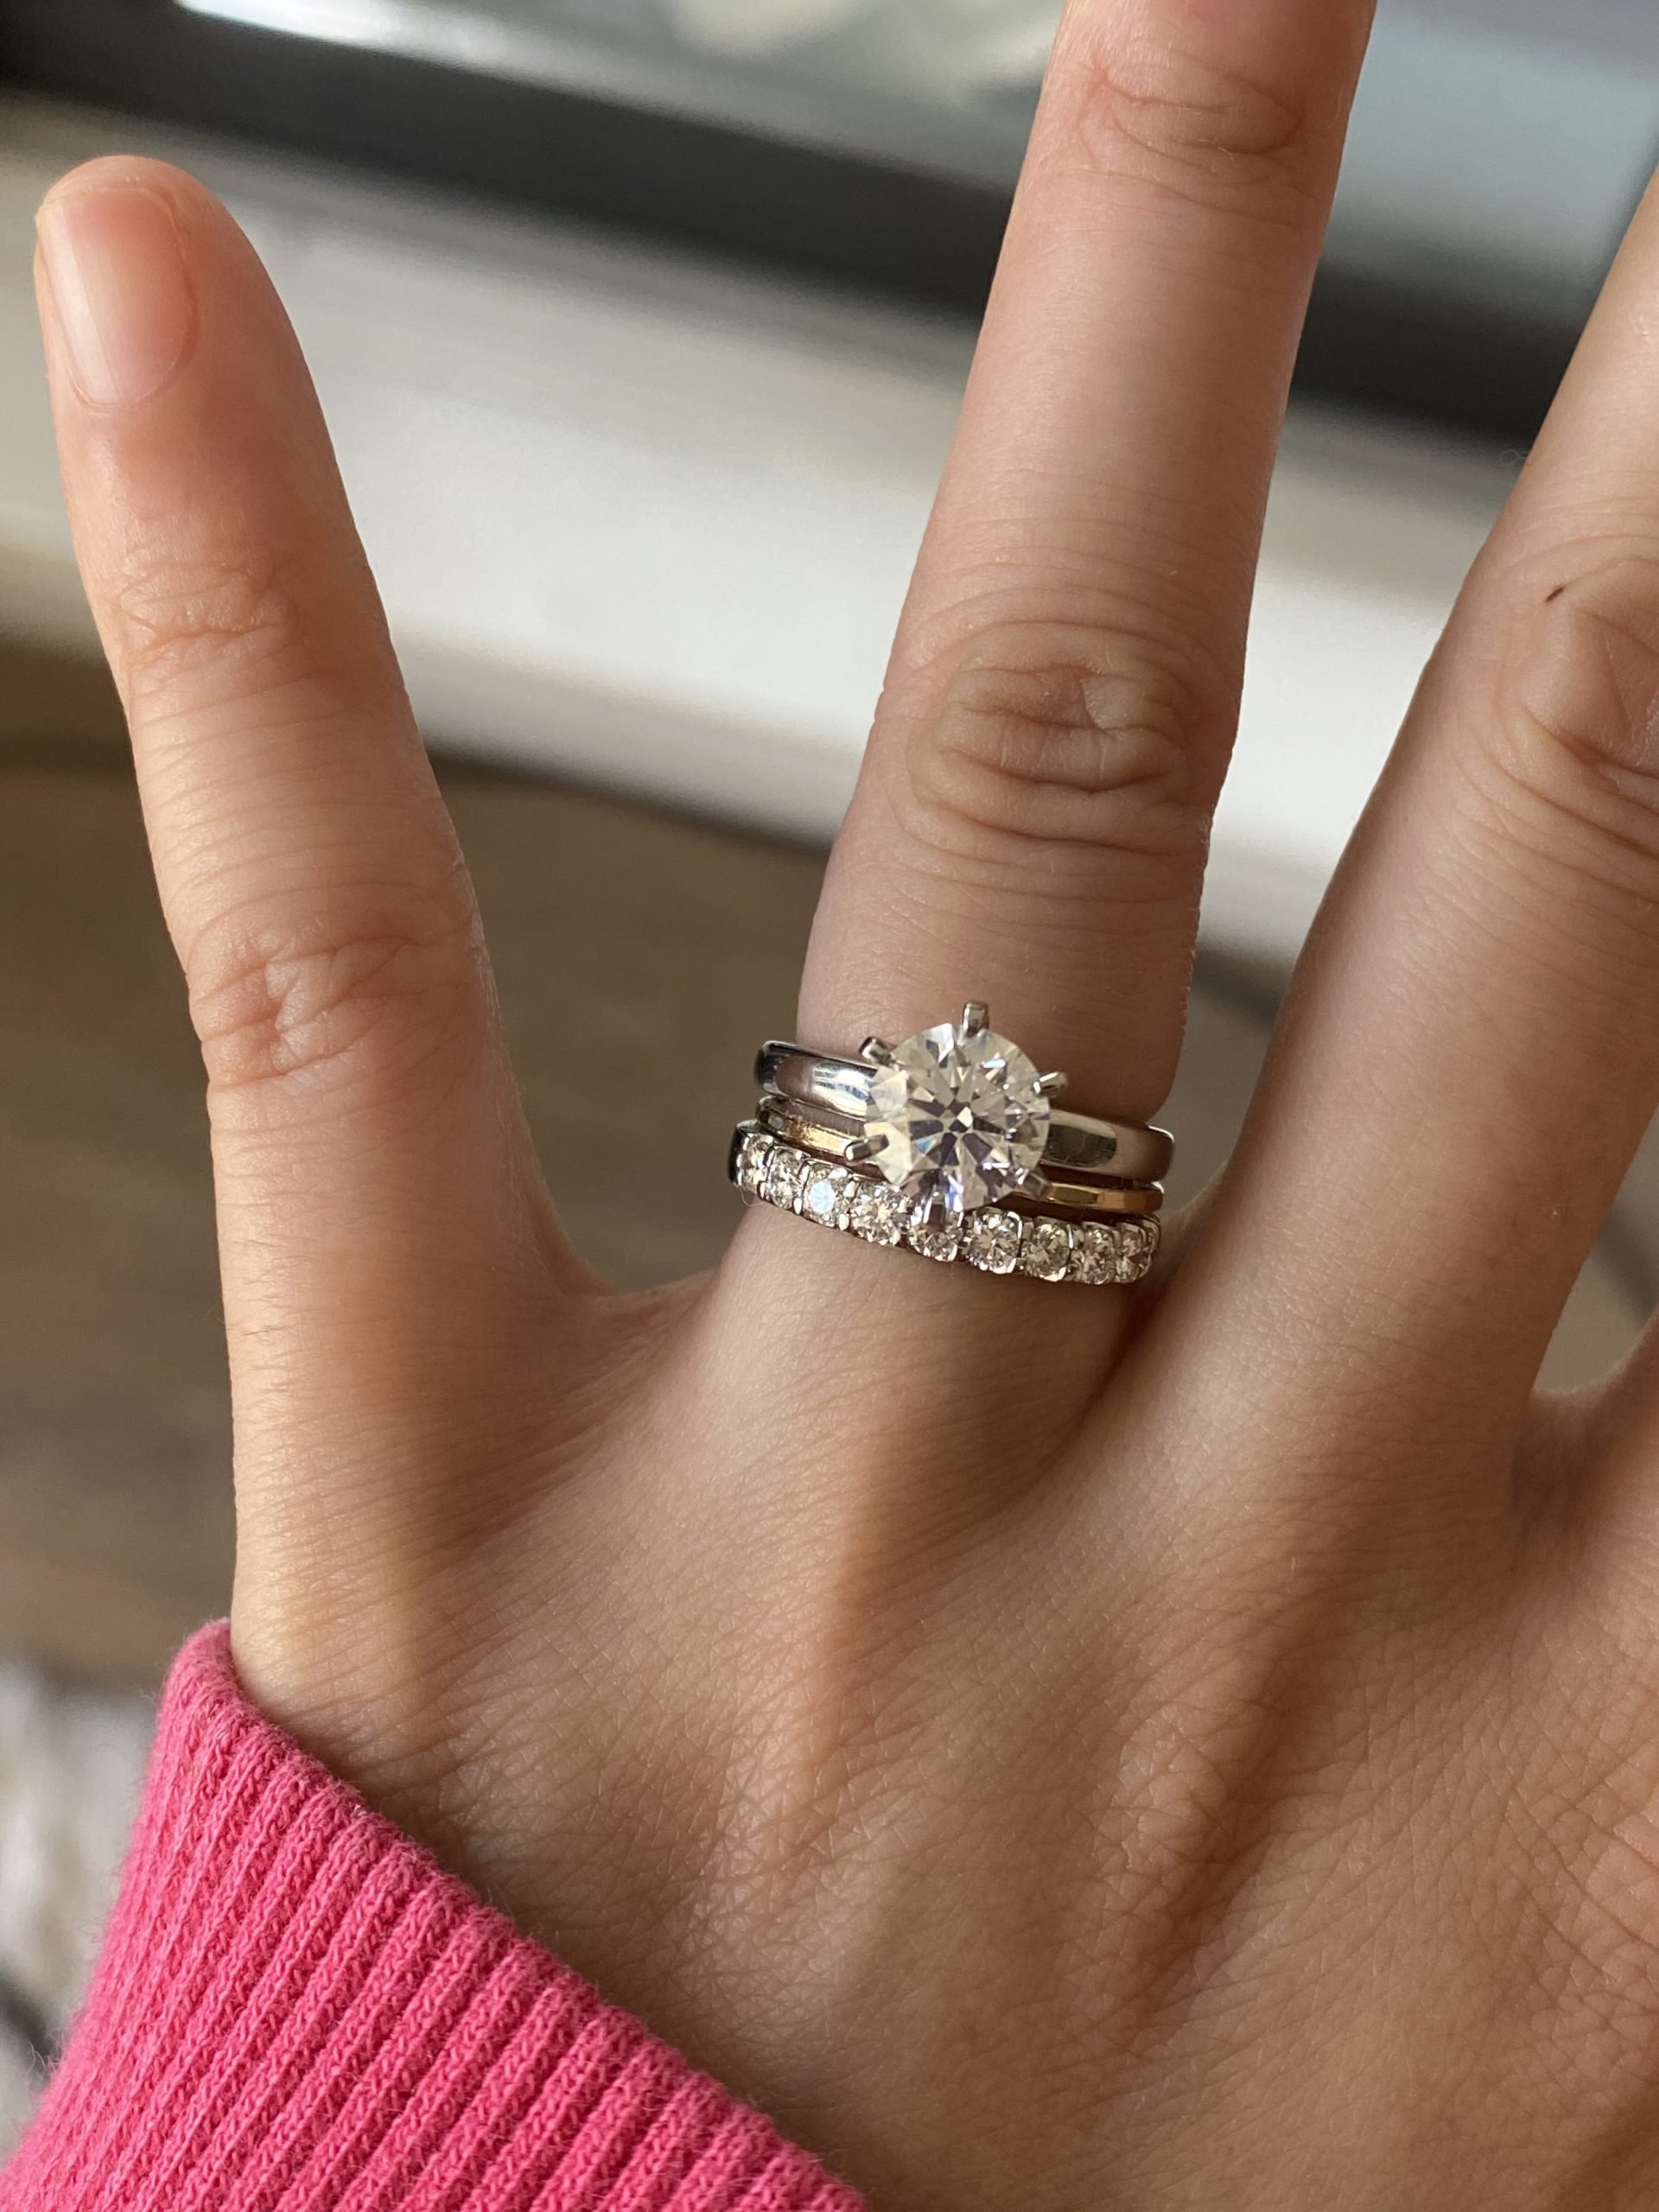 Pave wedding band from Costco  does it match my e